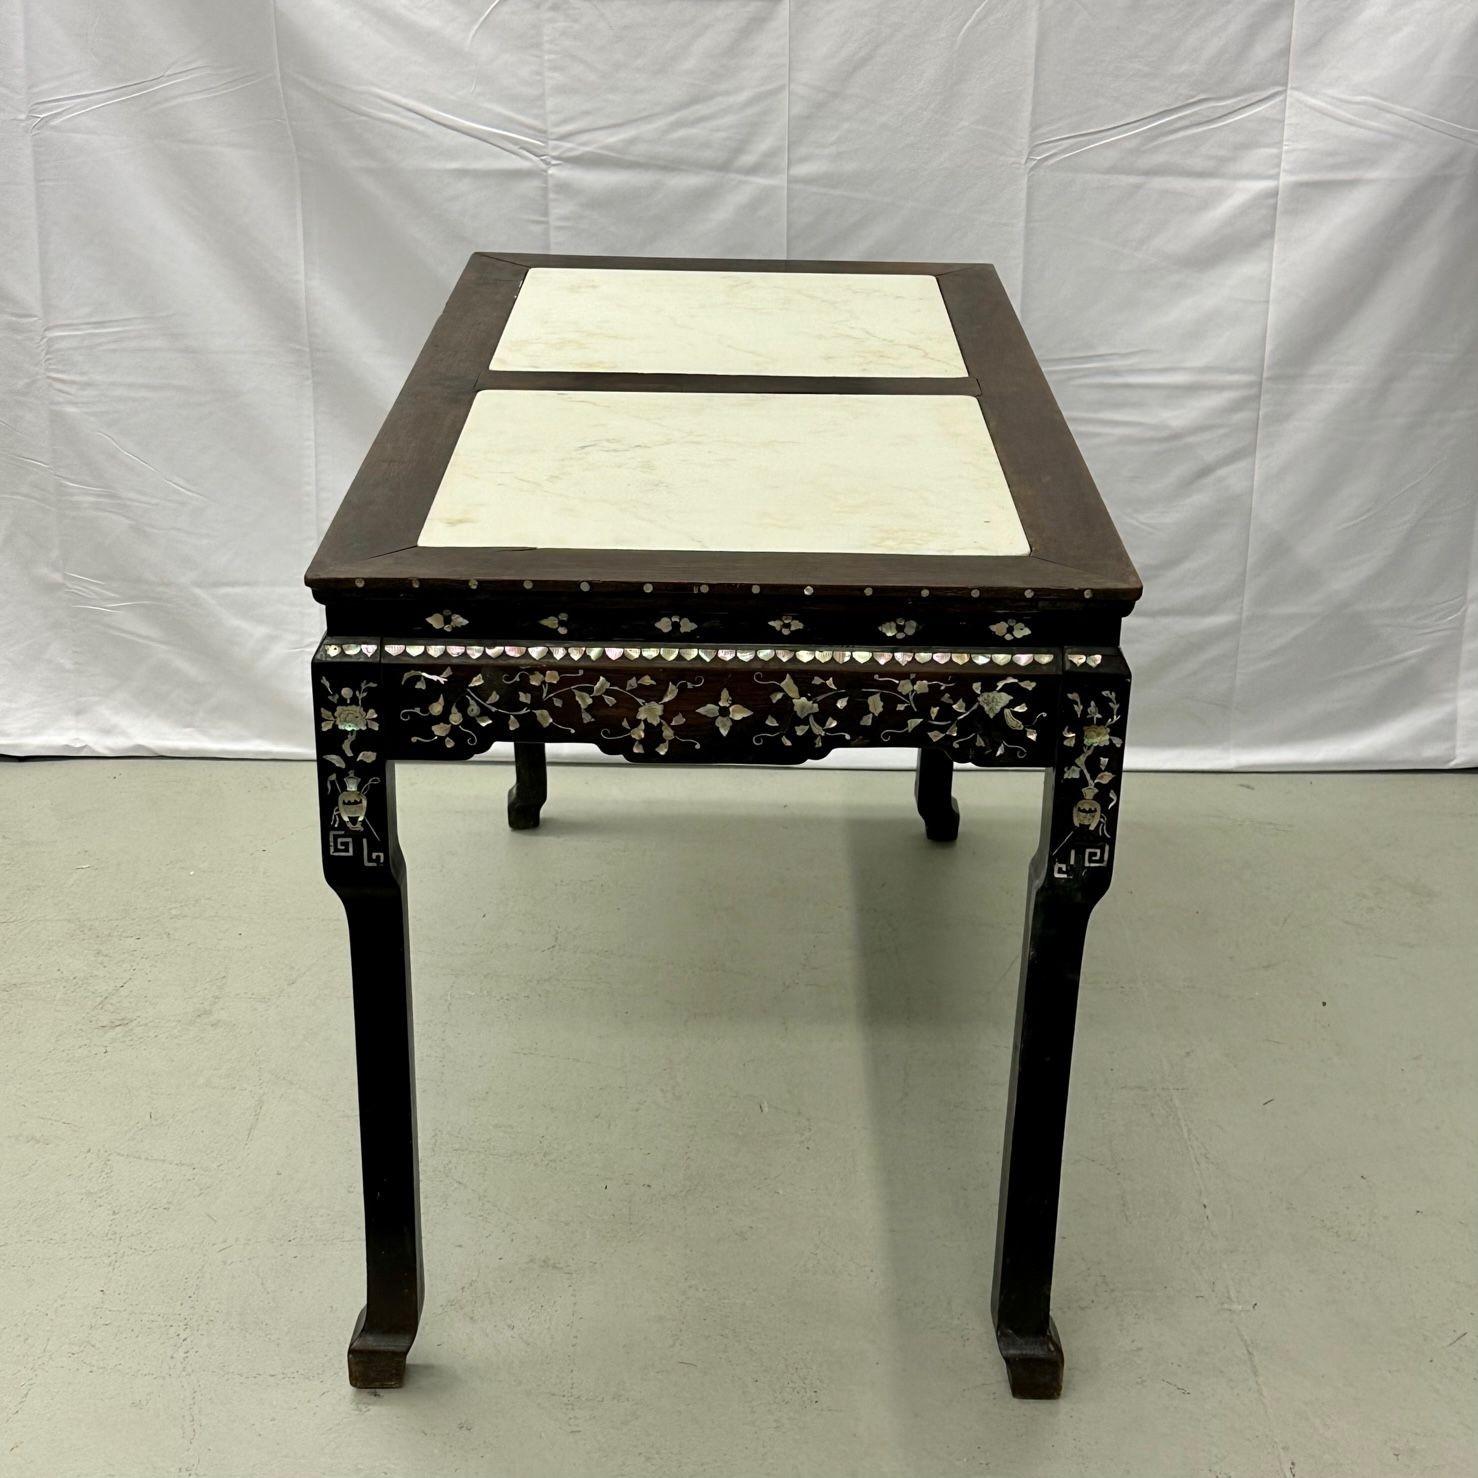 20th Century Syrian Console / Alter Table Rosewood and Mother of Pearl Inlay with Marble Top For Sale